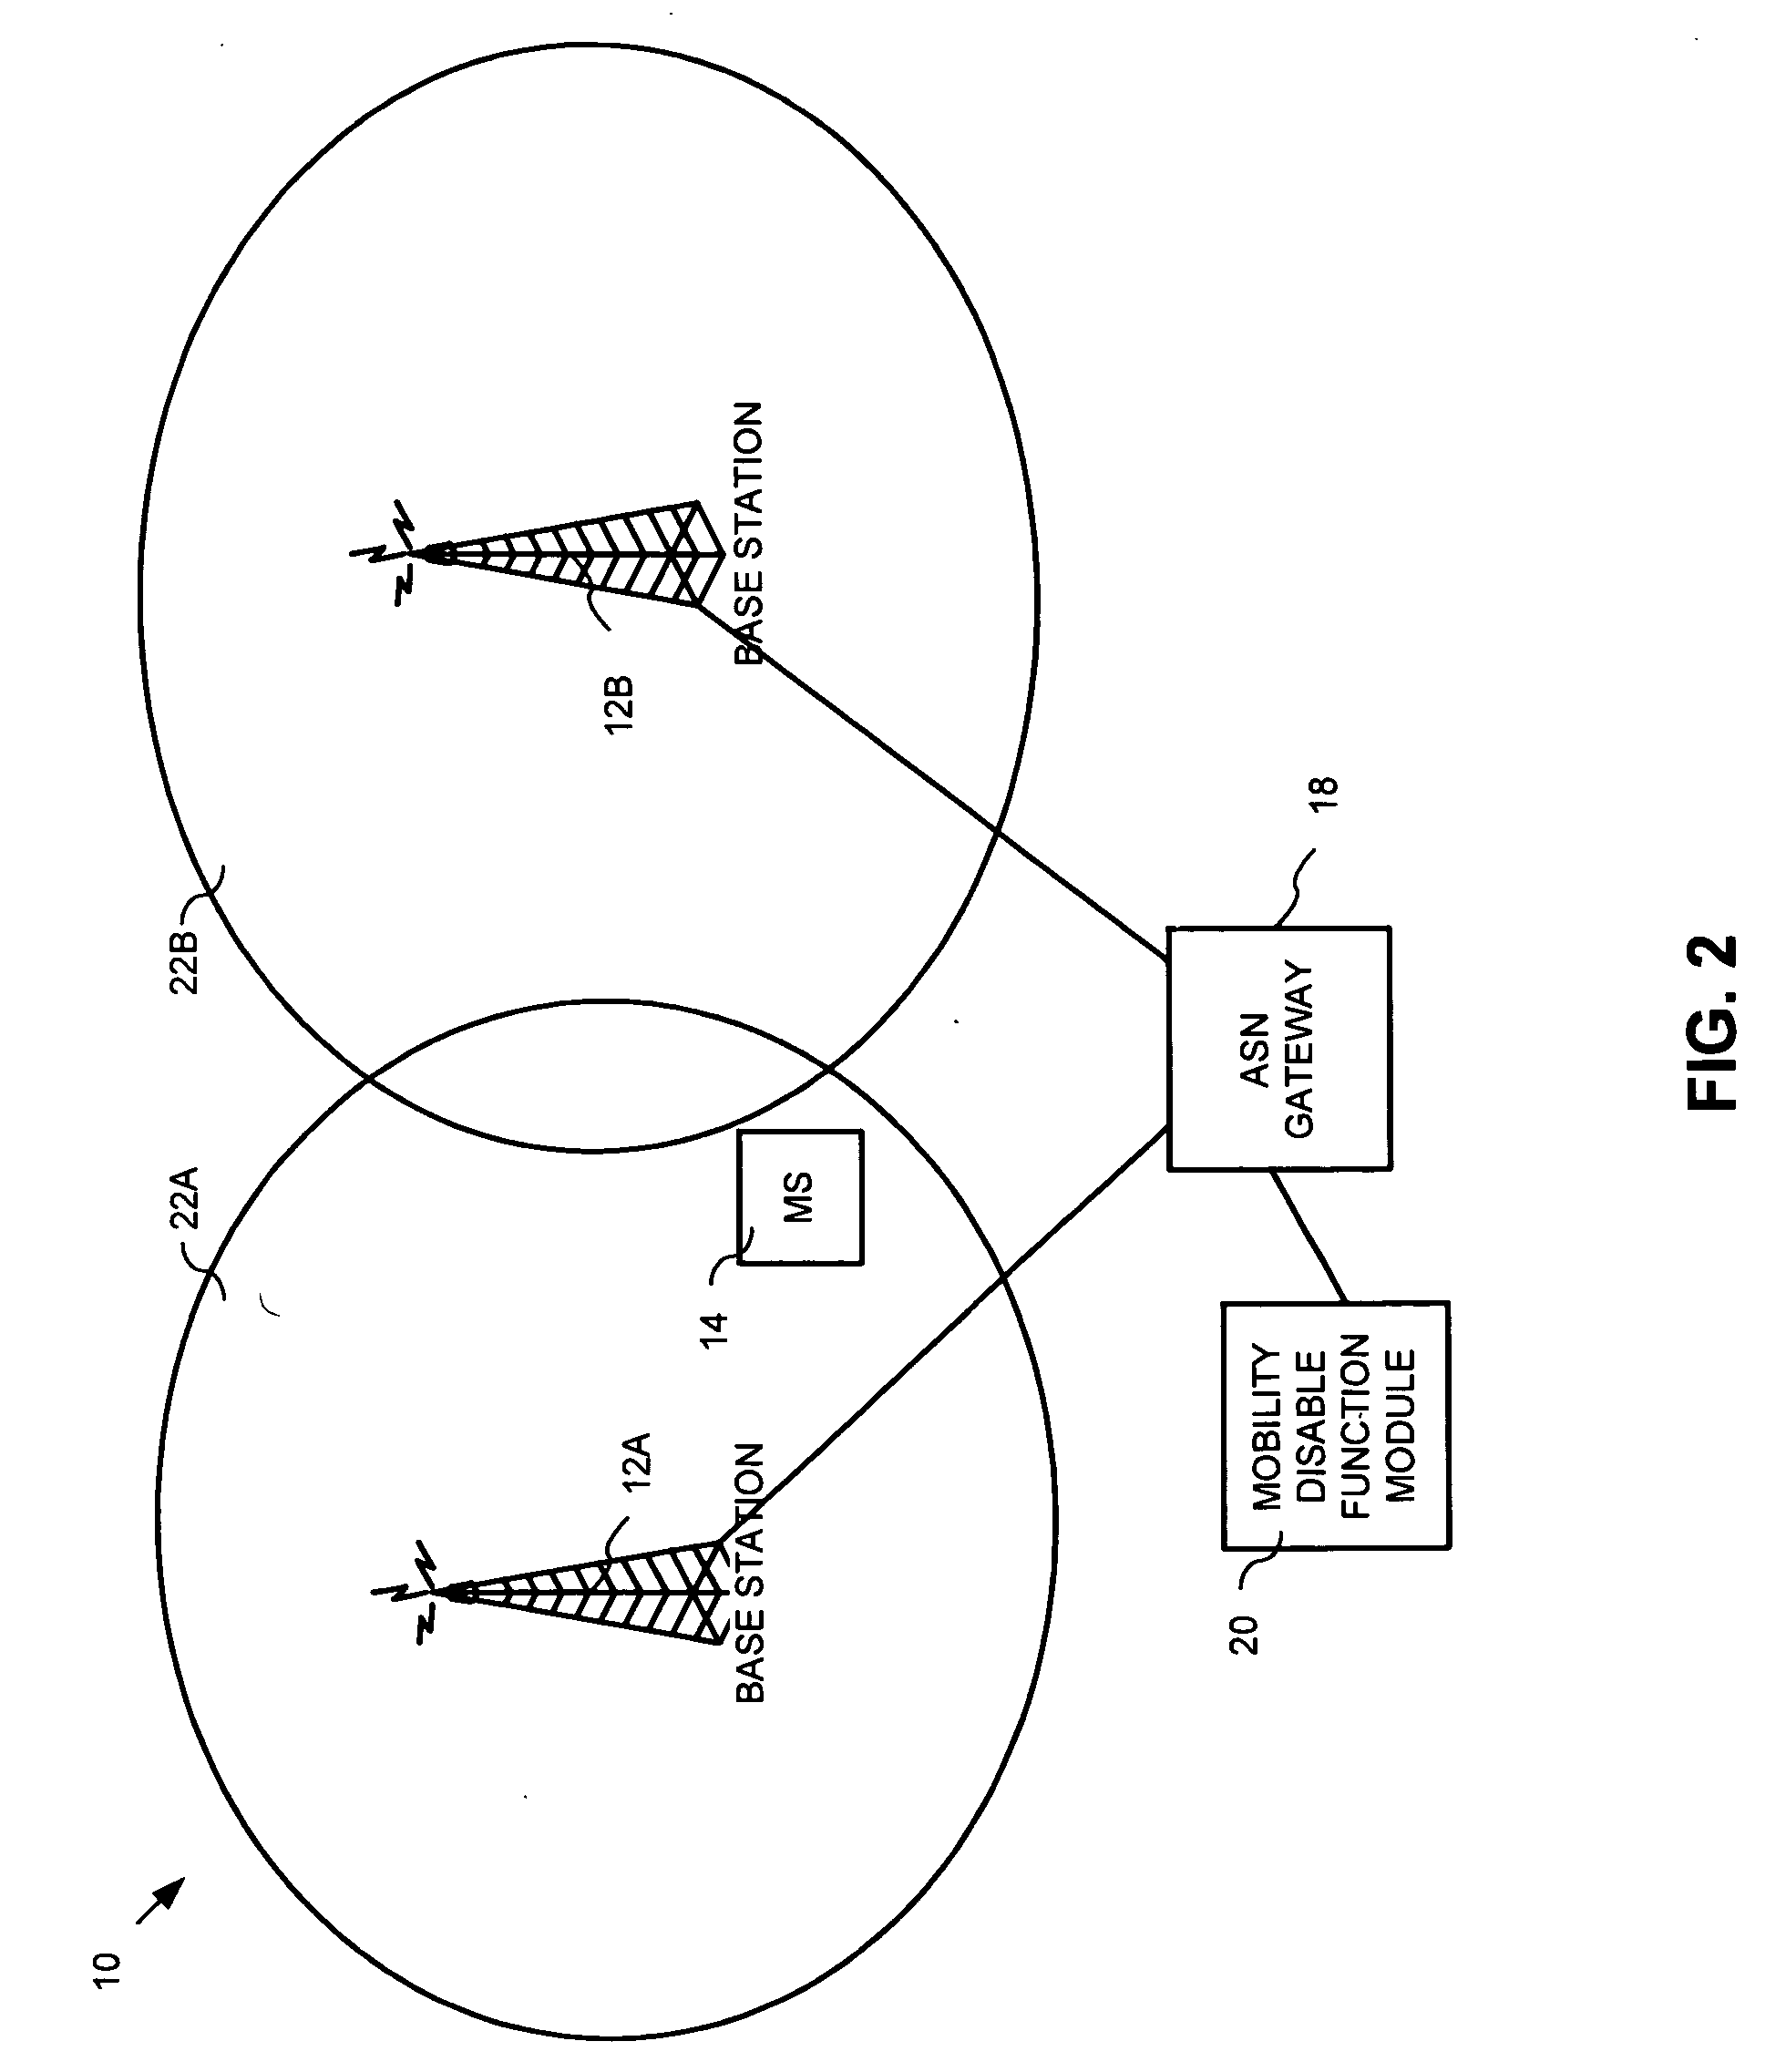 System and method for restricting mobility in wireless networks